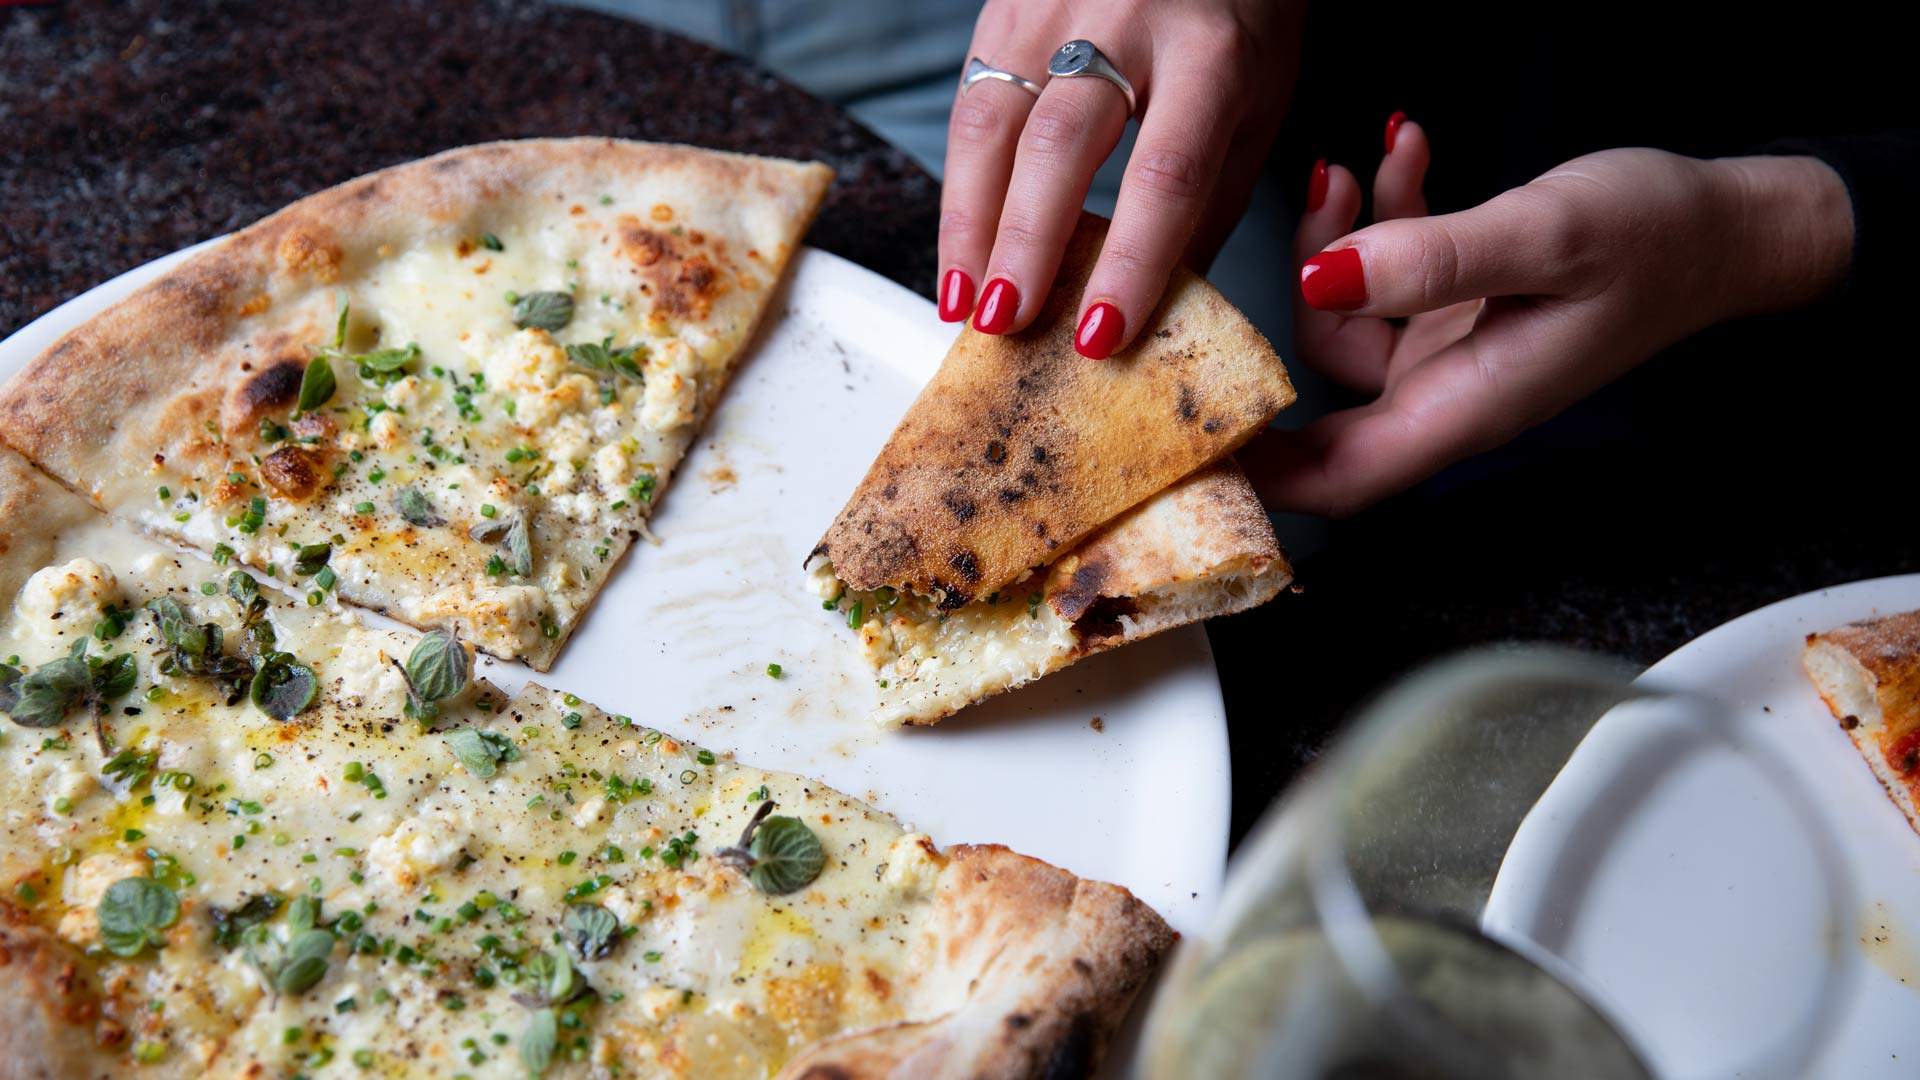 Bar Romantica - home to some of the best pizza in Melbourne.